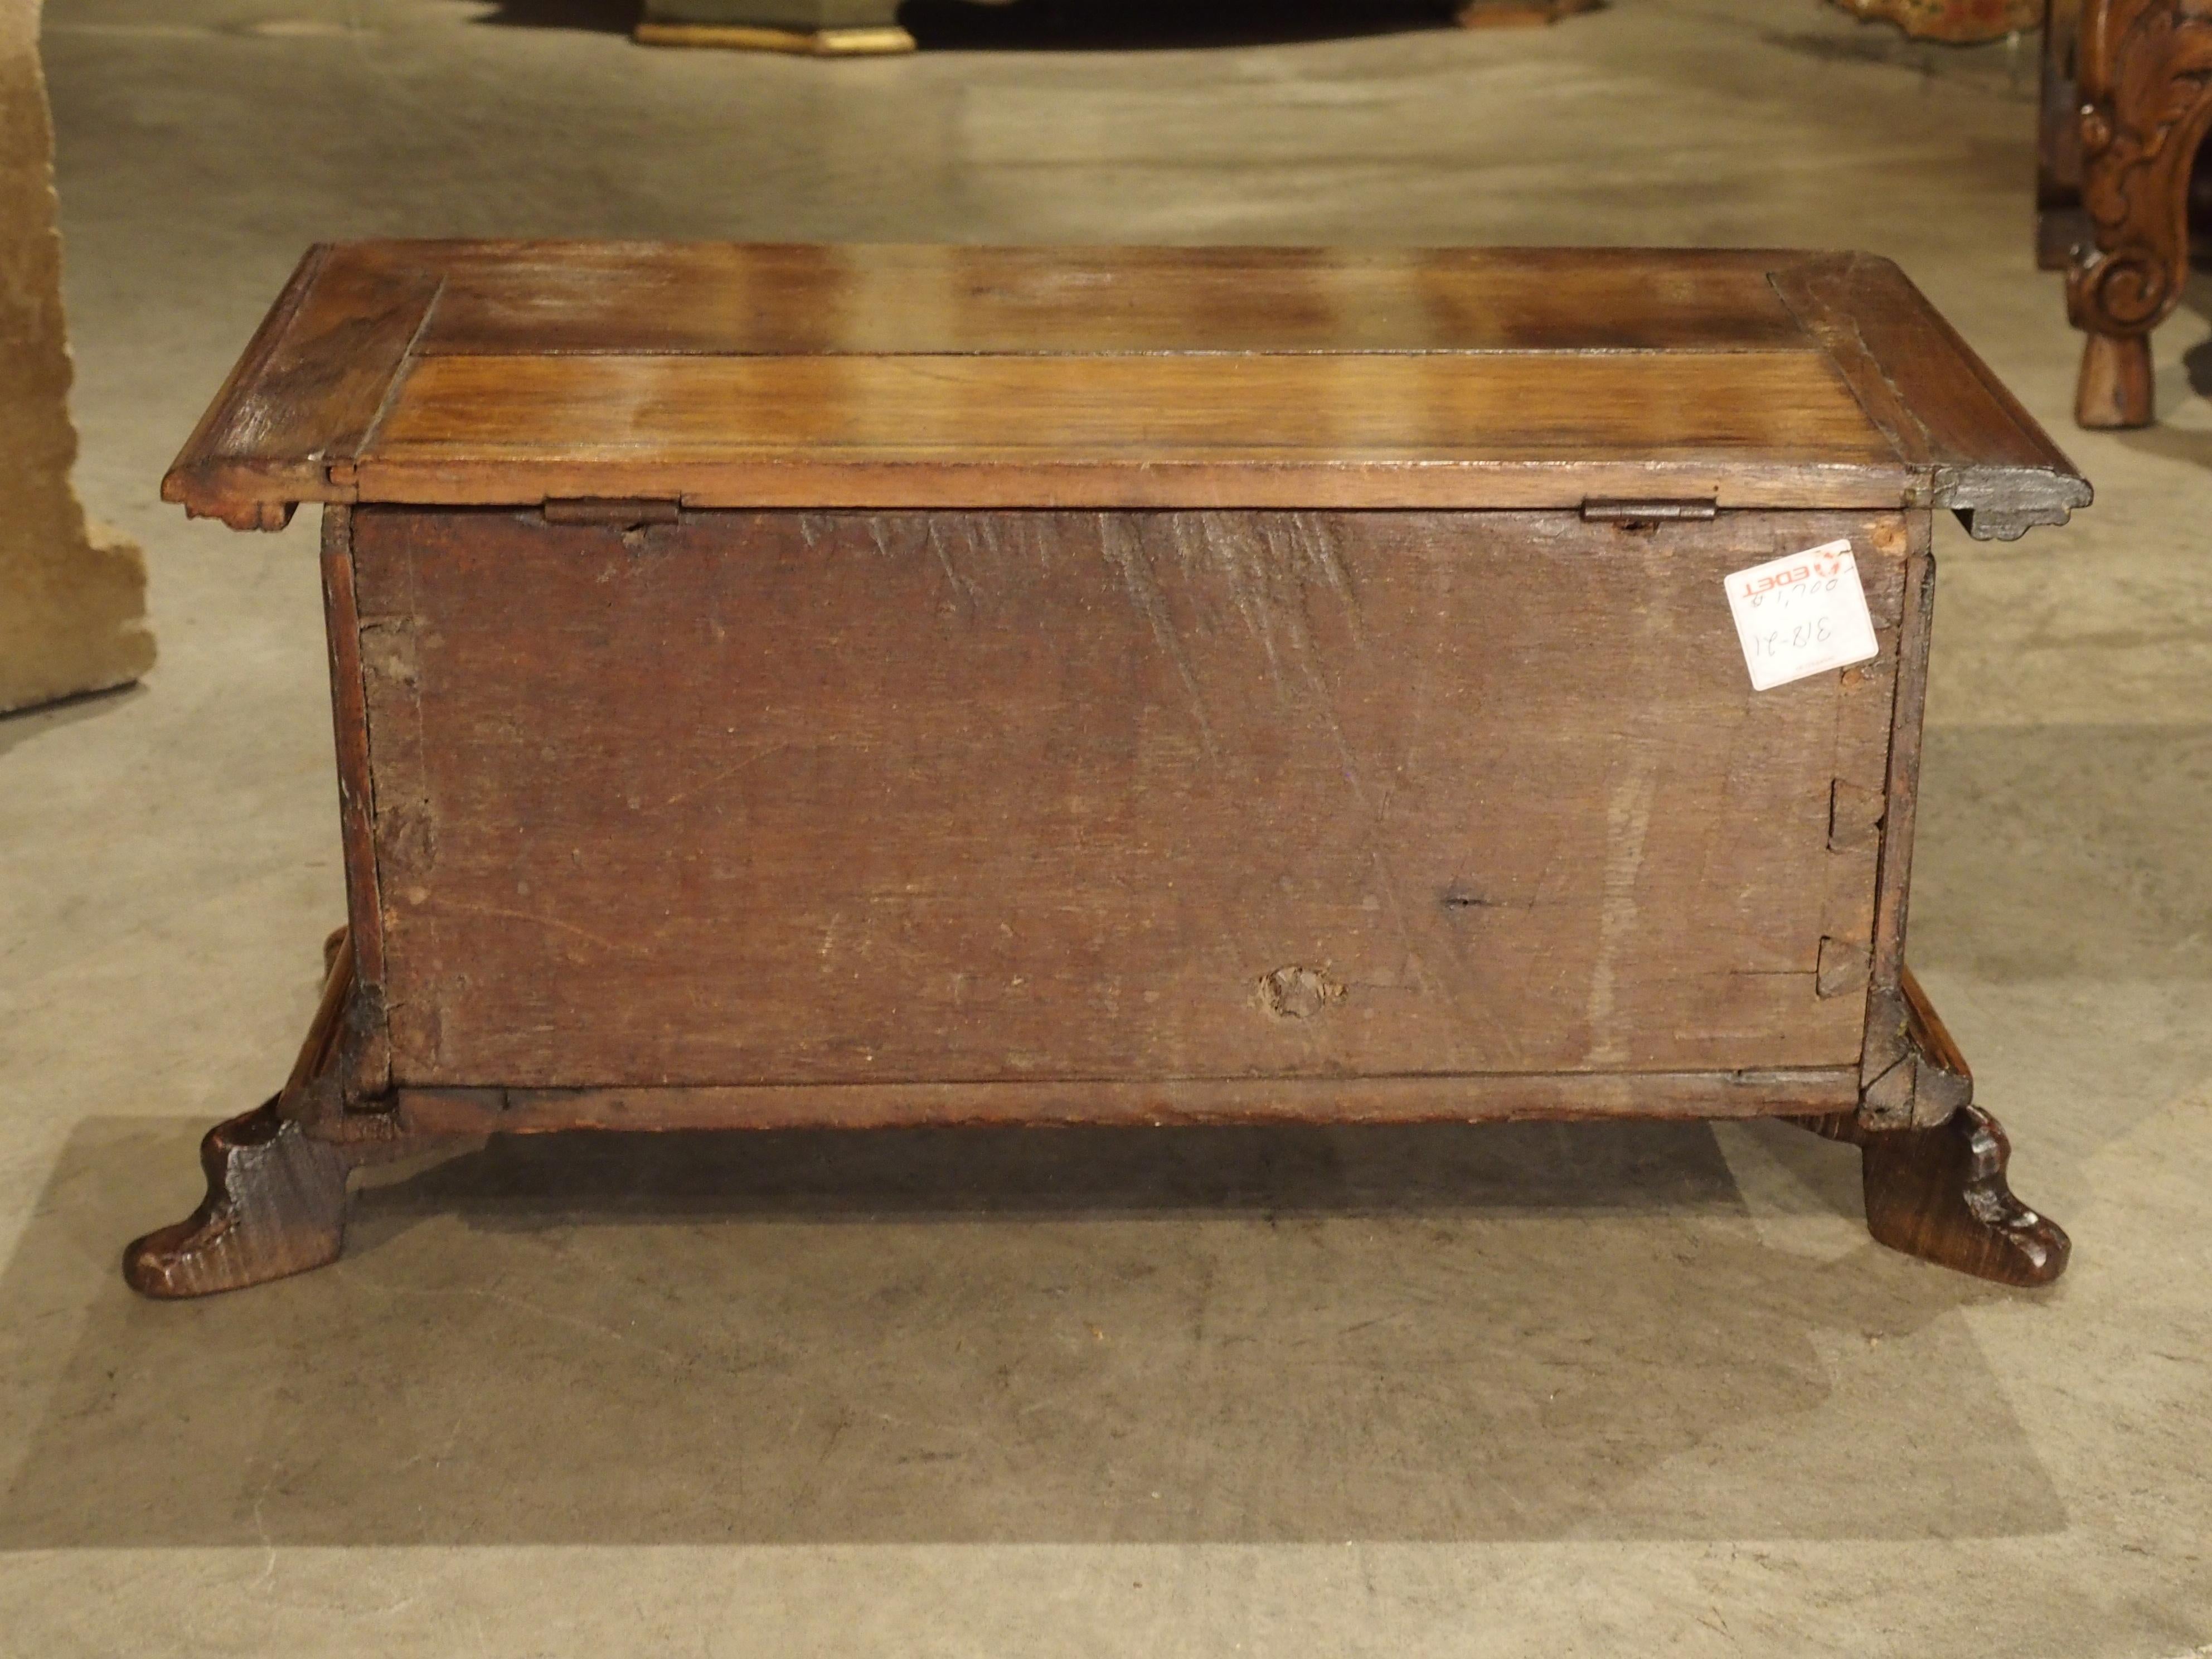 Renaissance Small Antique Walnut Wood Table Trunk from Northern Italy, circa 1700